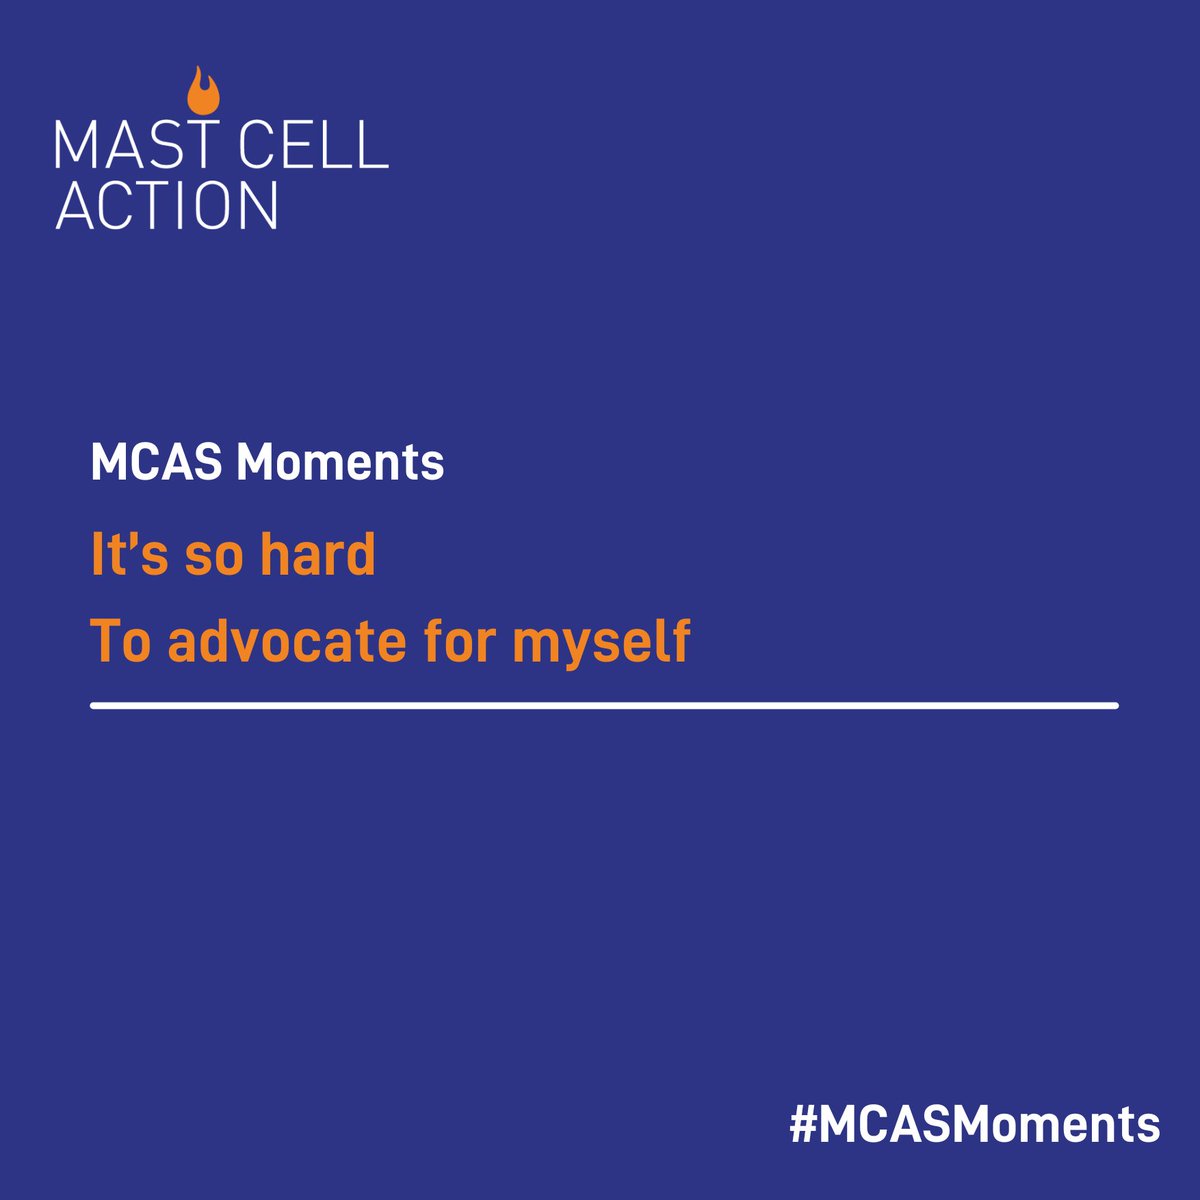 Many people with MCAS have to advocate for themselves as it’s still a condition with not a lot of awareness among professionals. Our work at Mast Cell Action is trying to change this.